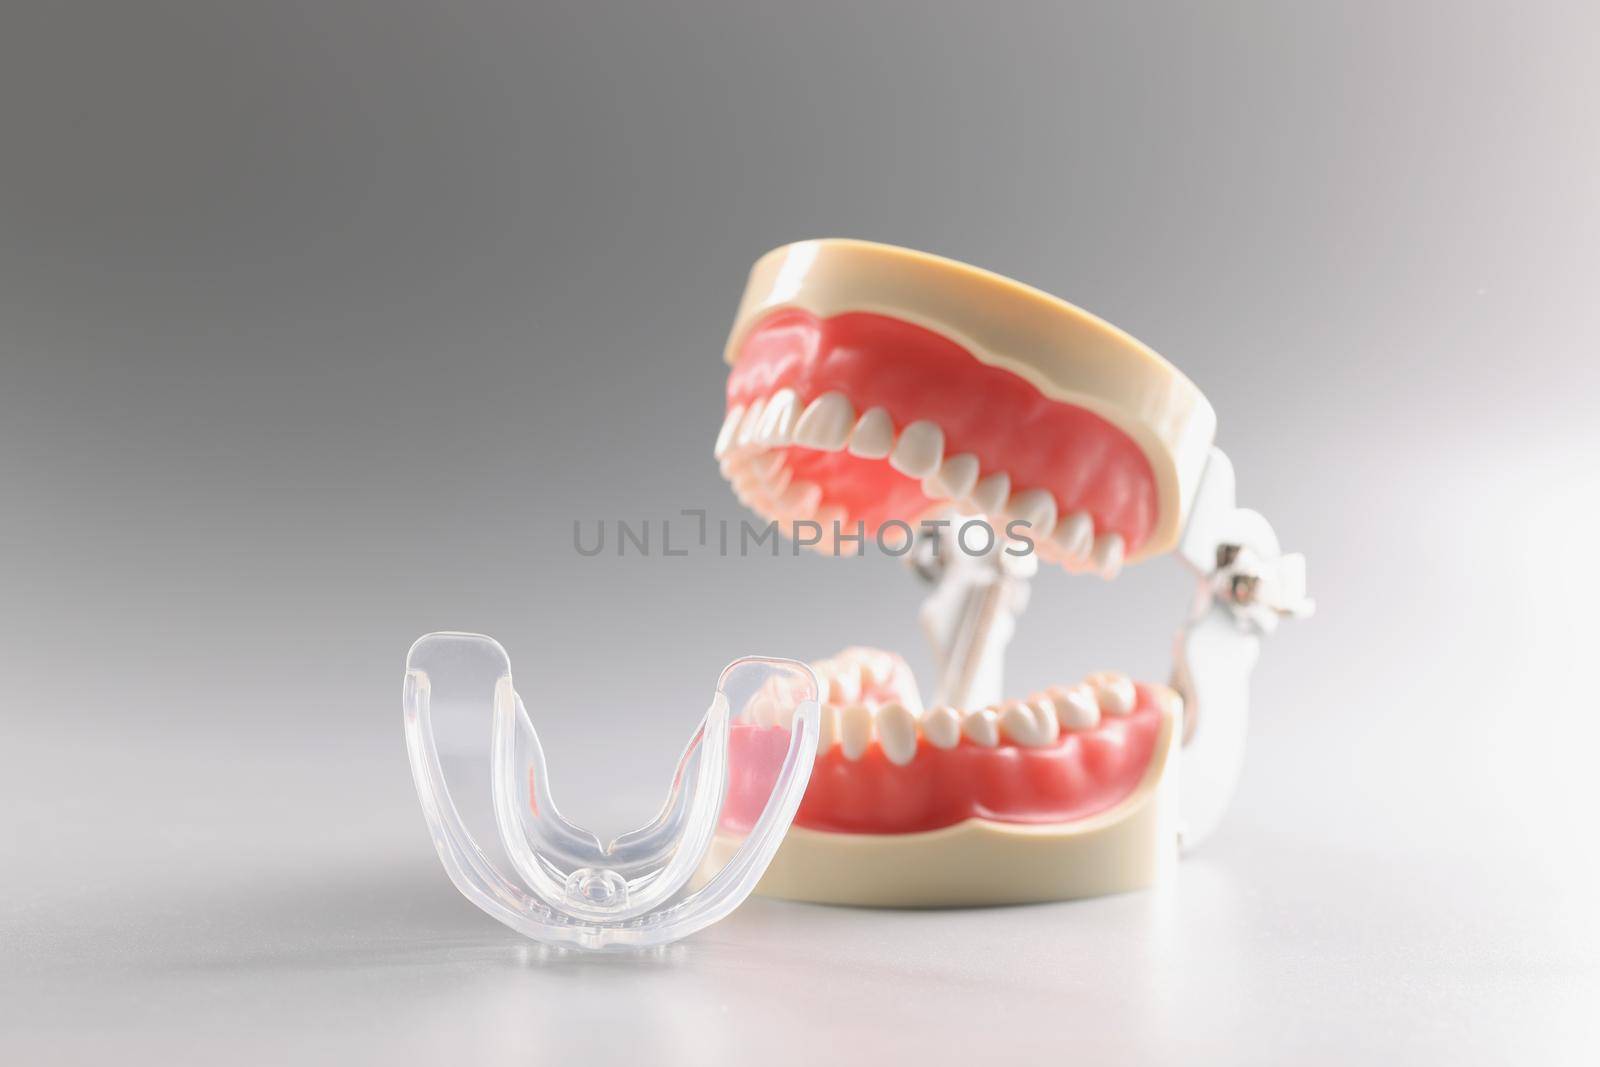 Human tooth model, teeth orthodontic dental model or human jaw, mouthpiece by kuprevich